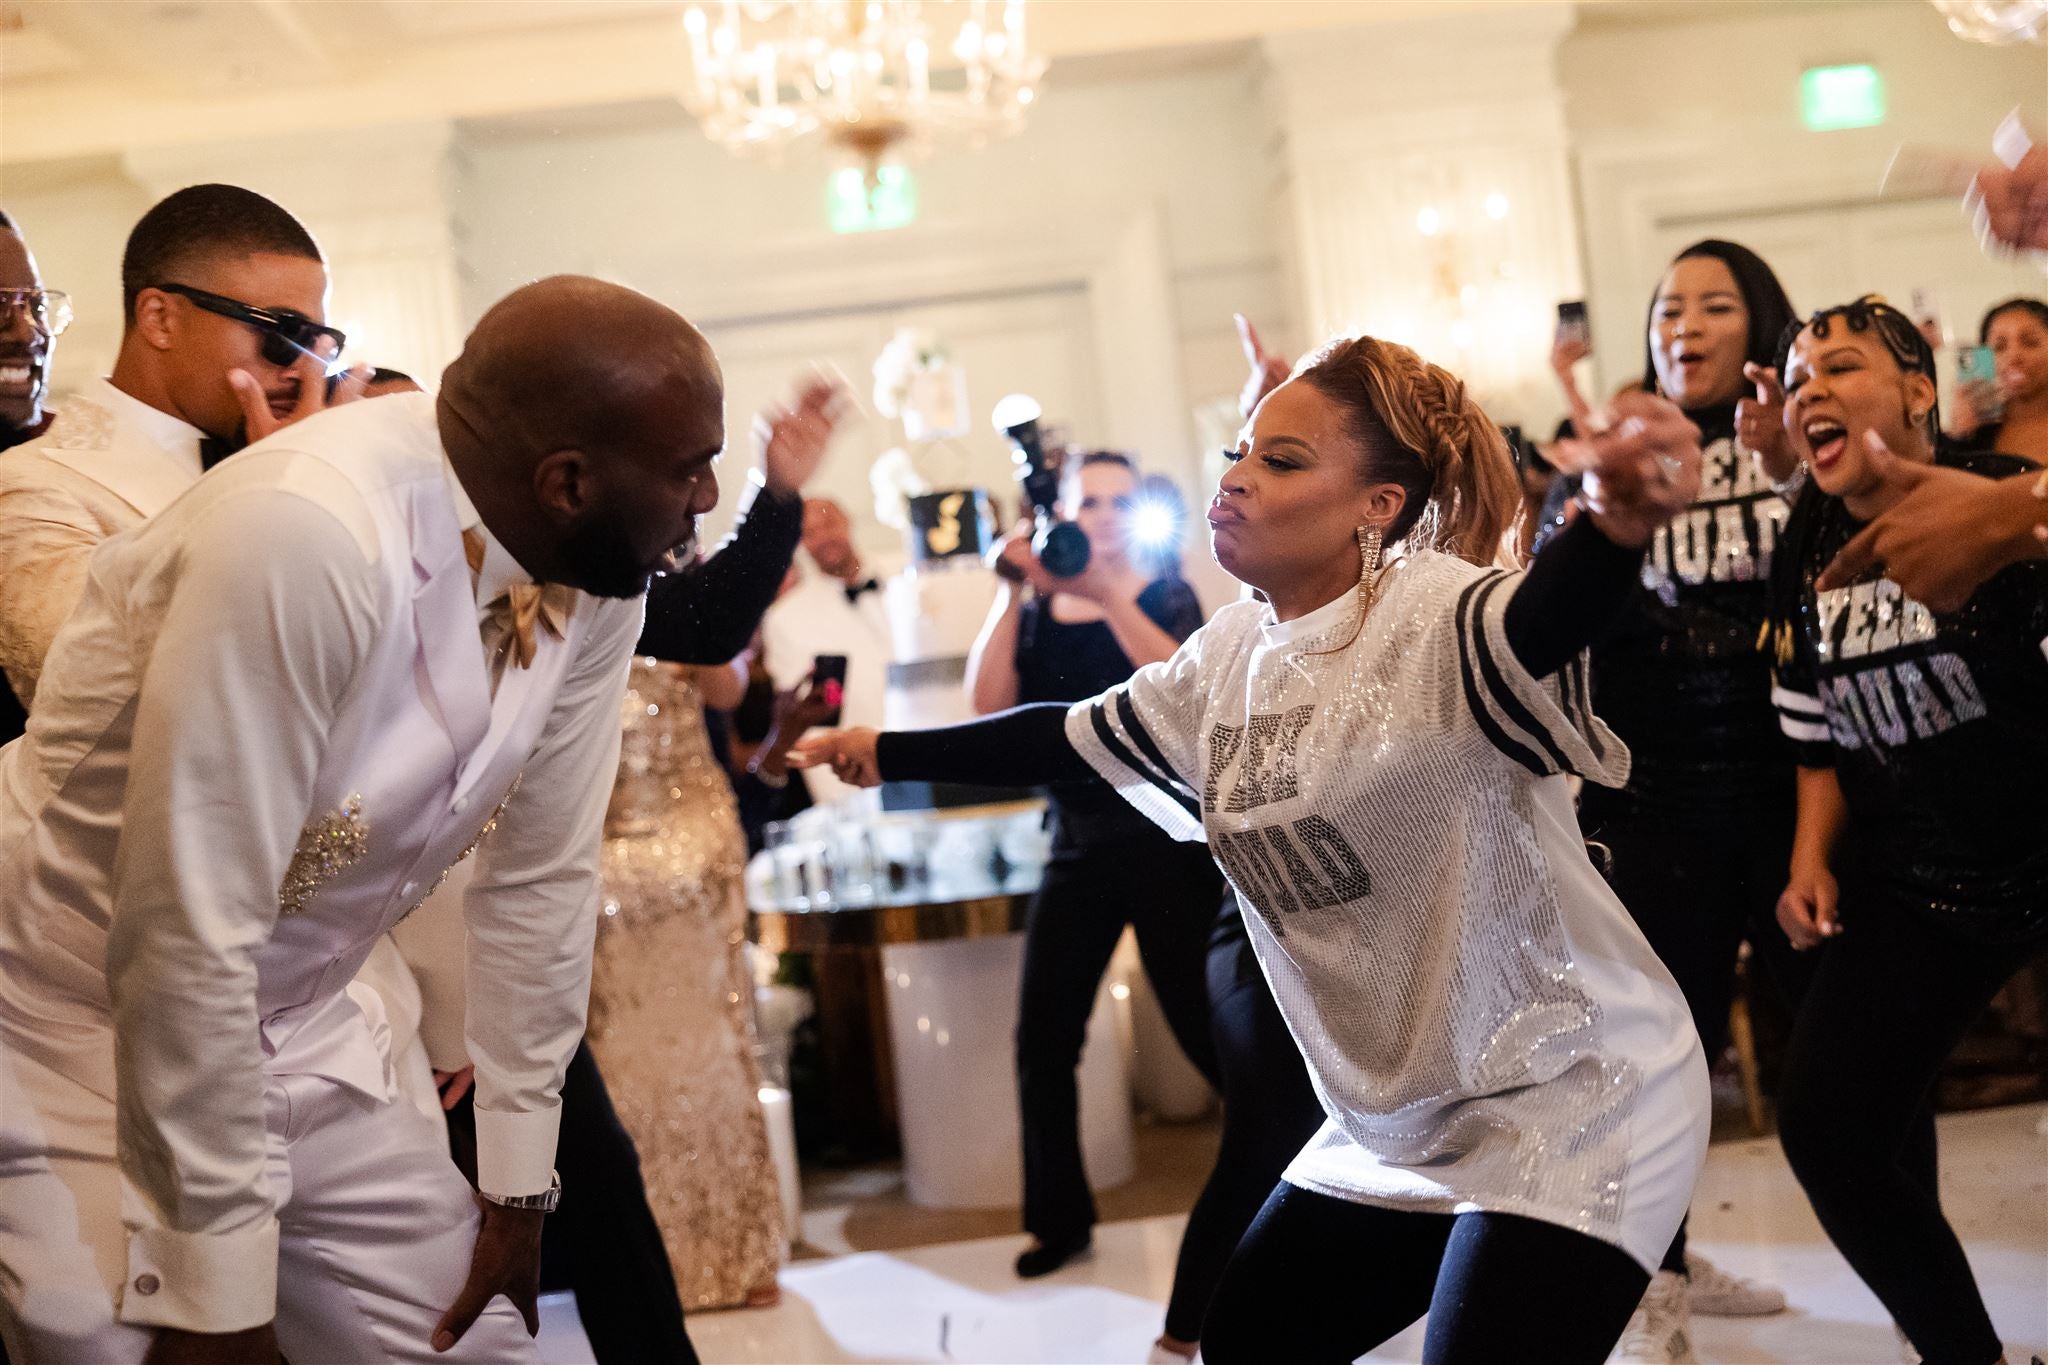 Bridal Bliss: Inside Director Crystle Roberson And Actor Omar Dorsey's Star-Studded New Year's Eve Celebration In LA